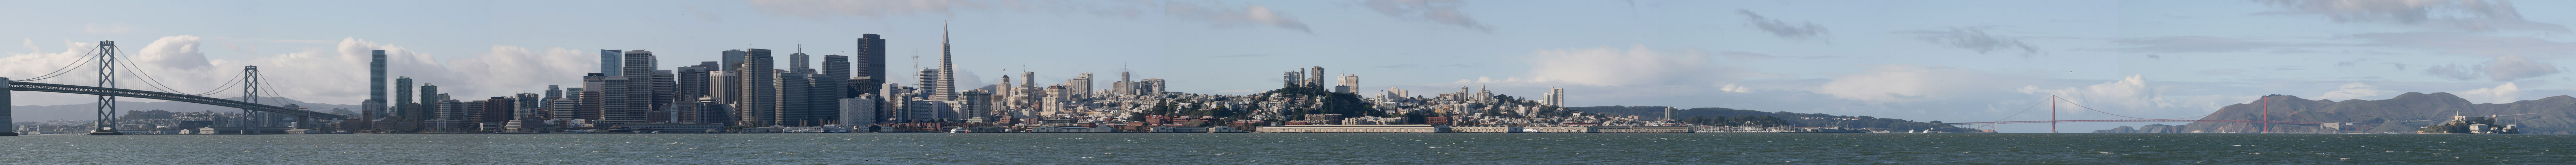 With good weather, the island offers a spectacular view of San Francisco